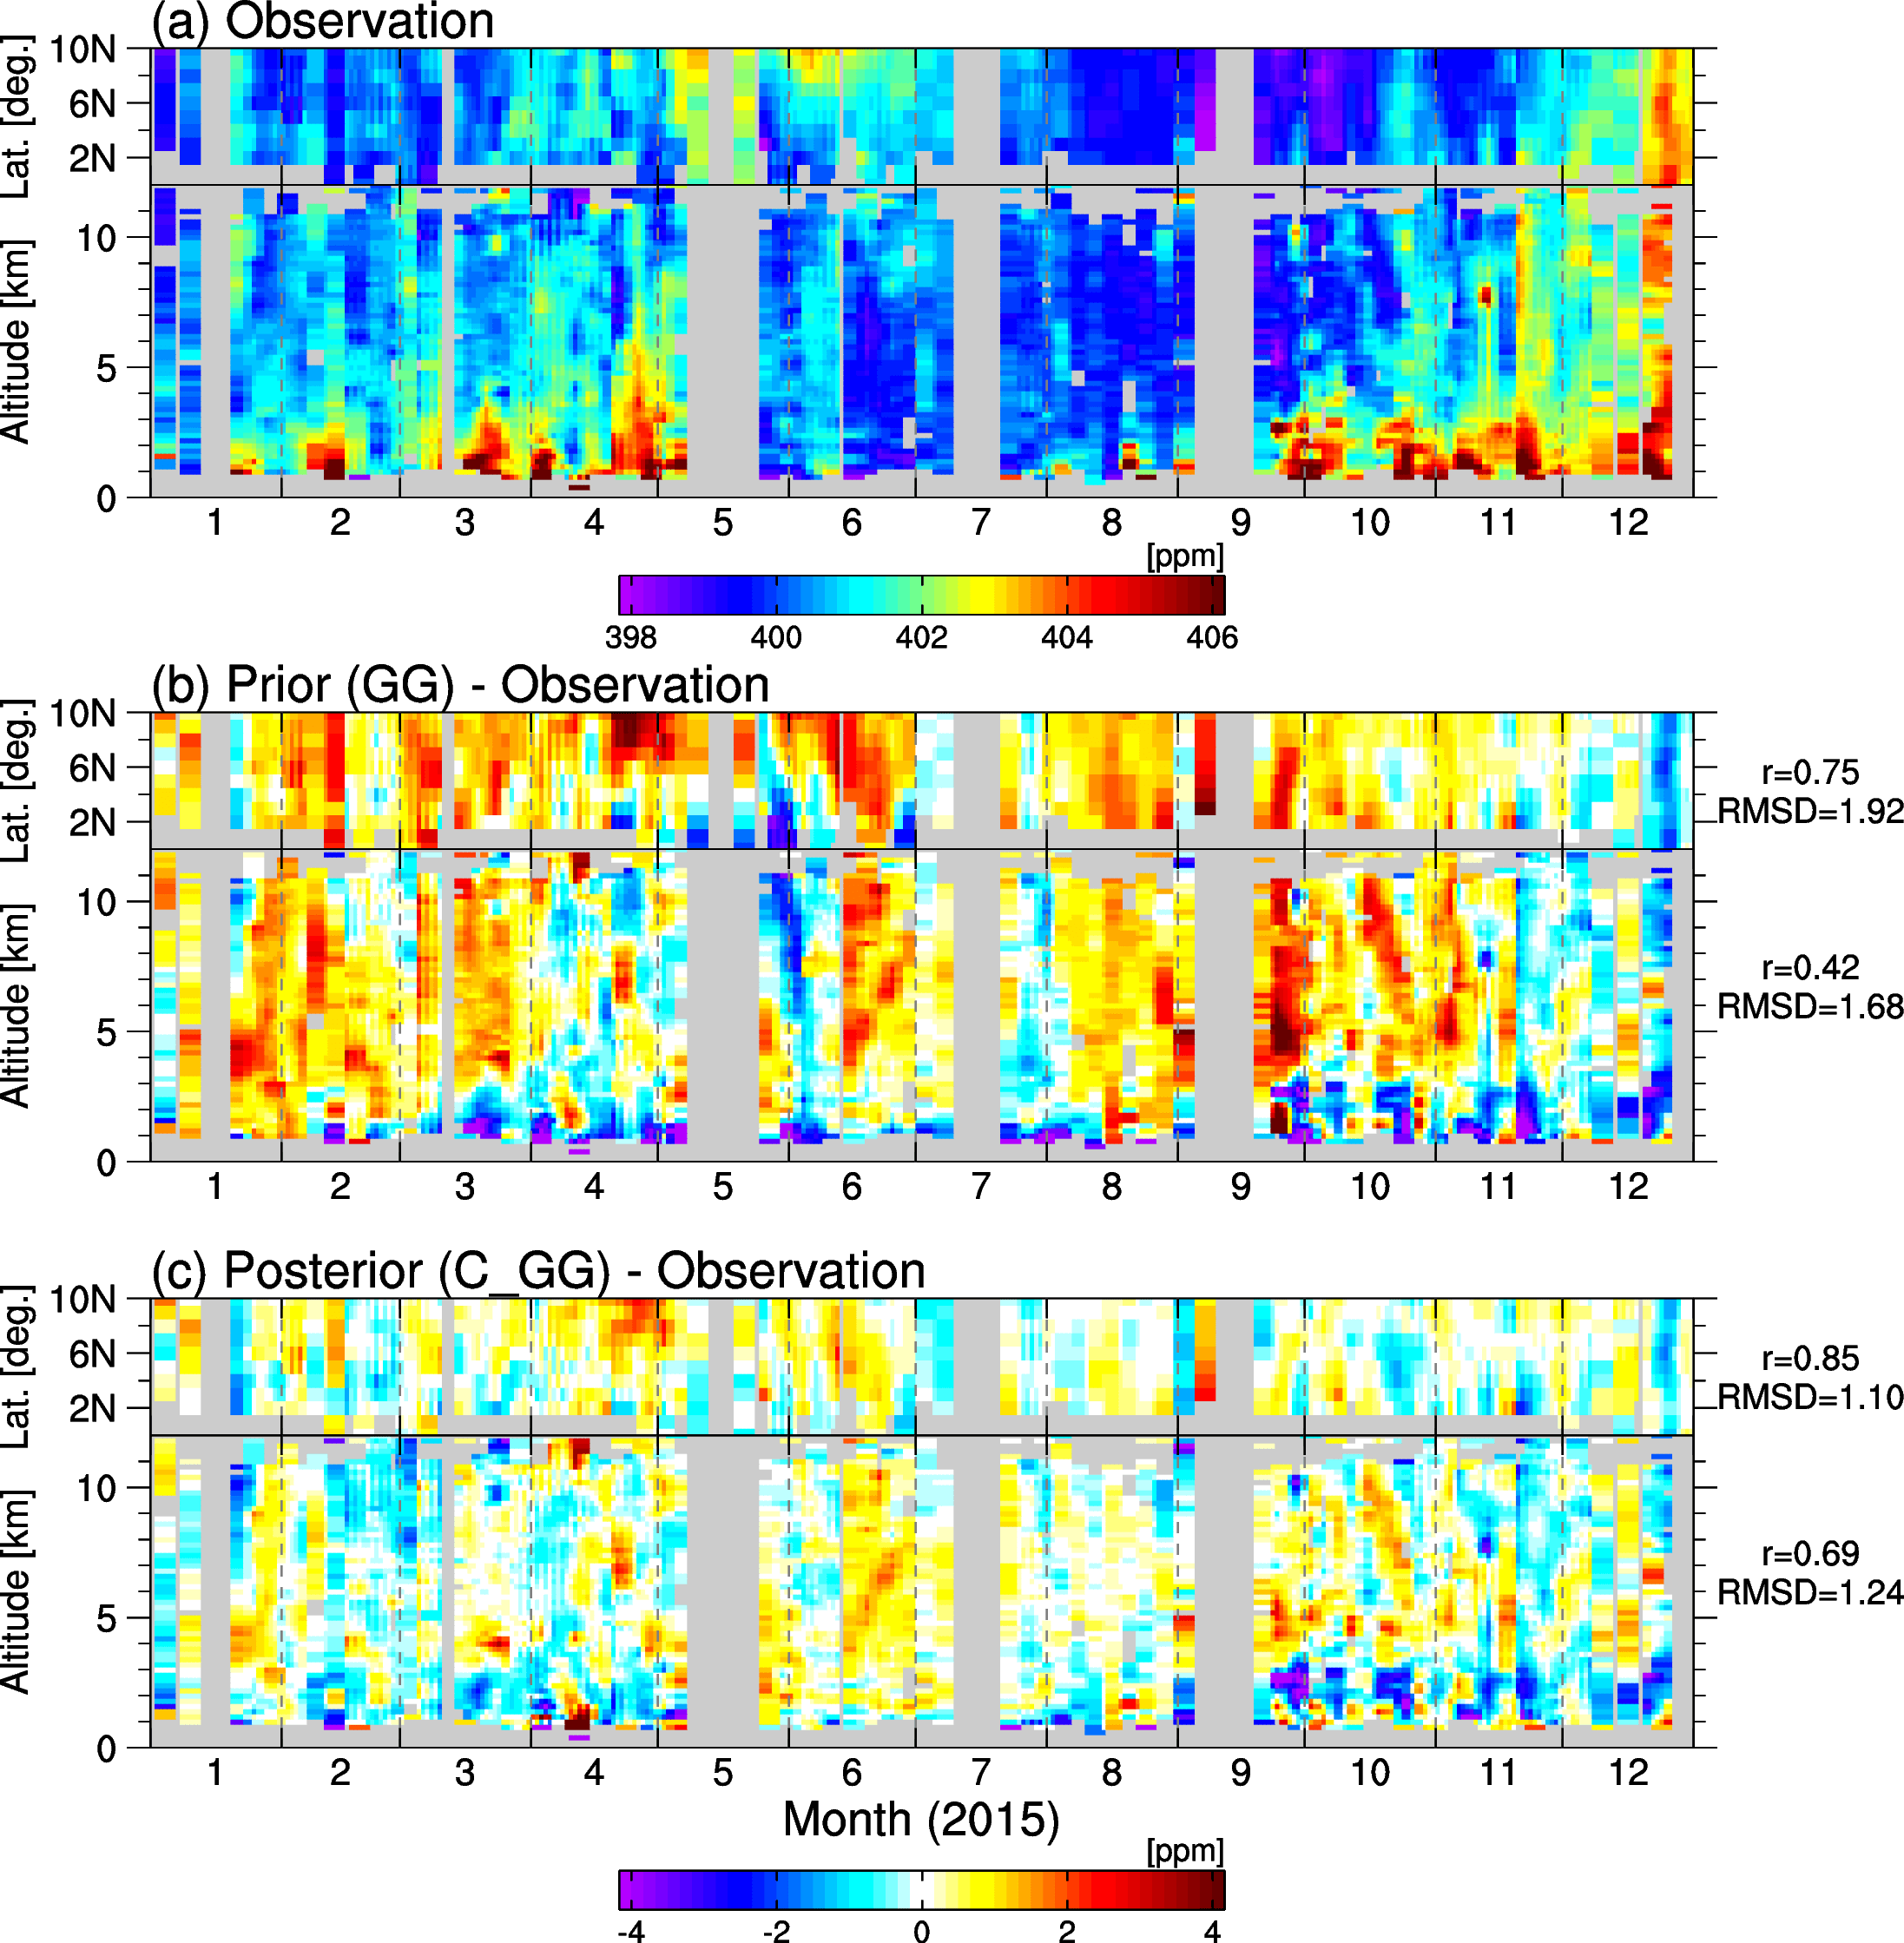 CO2 mole fractions in the free troposphere around Equatorial Asia observed by CONTRAIL (a) and their corresponding prior (GG)(b) and posterior (C_GG) (c) model values deviated from the observations. Each upper panel presents a time-latitude cross-section from cruising mode data(~11 km above sea level) within the longitude range of 90°–130°E, and the lower one shows a time-altitude cross-section from ascending/descending data over Singapore.